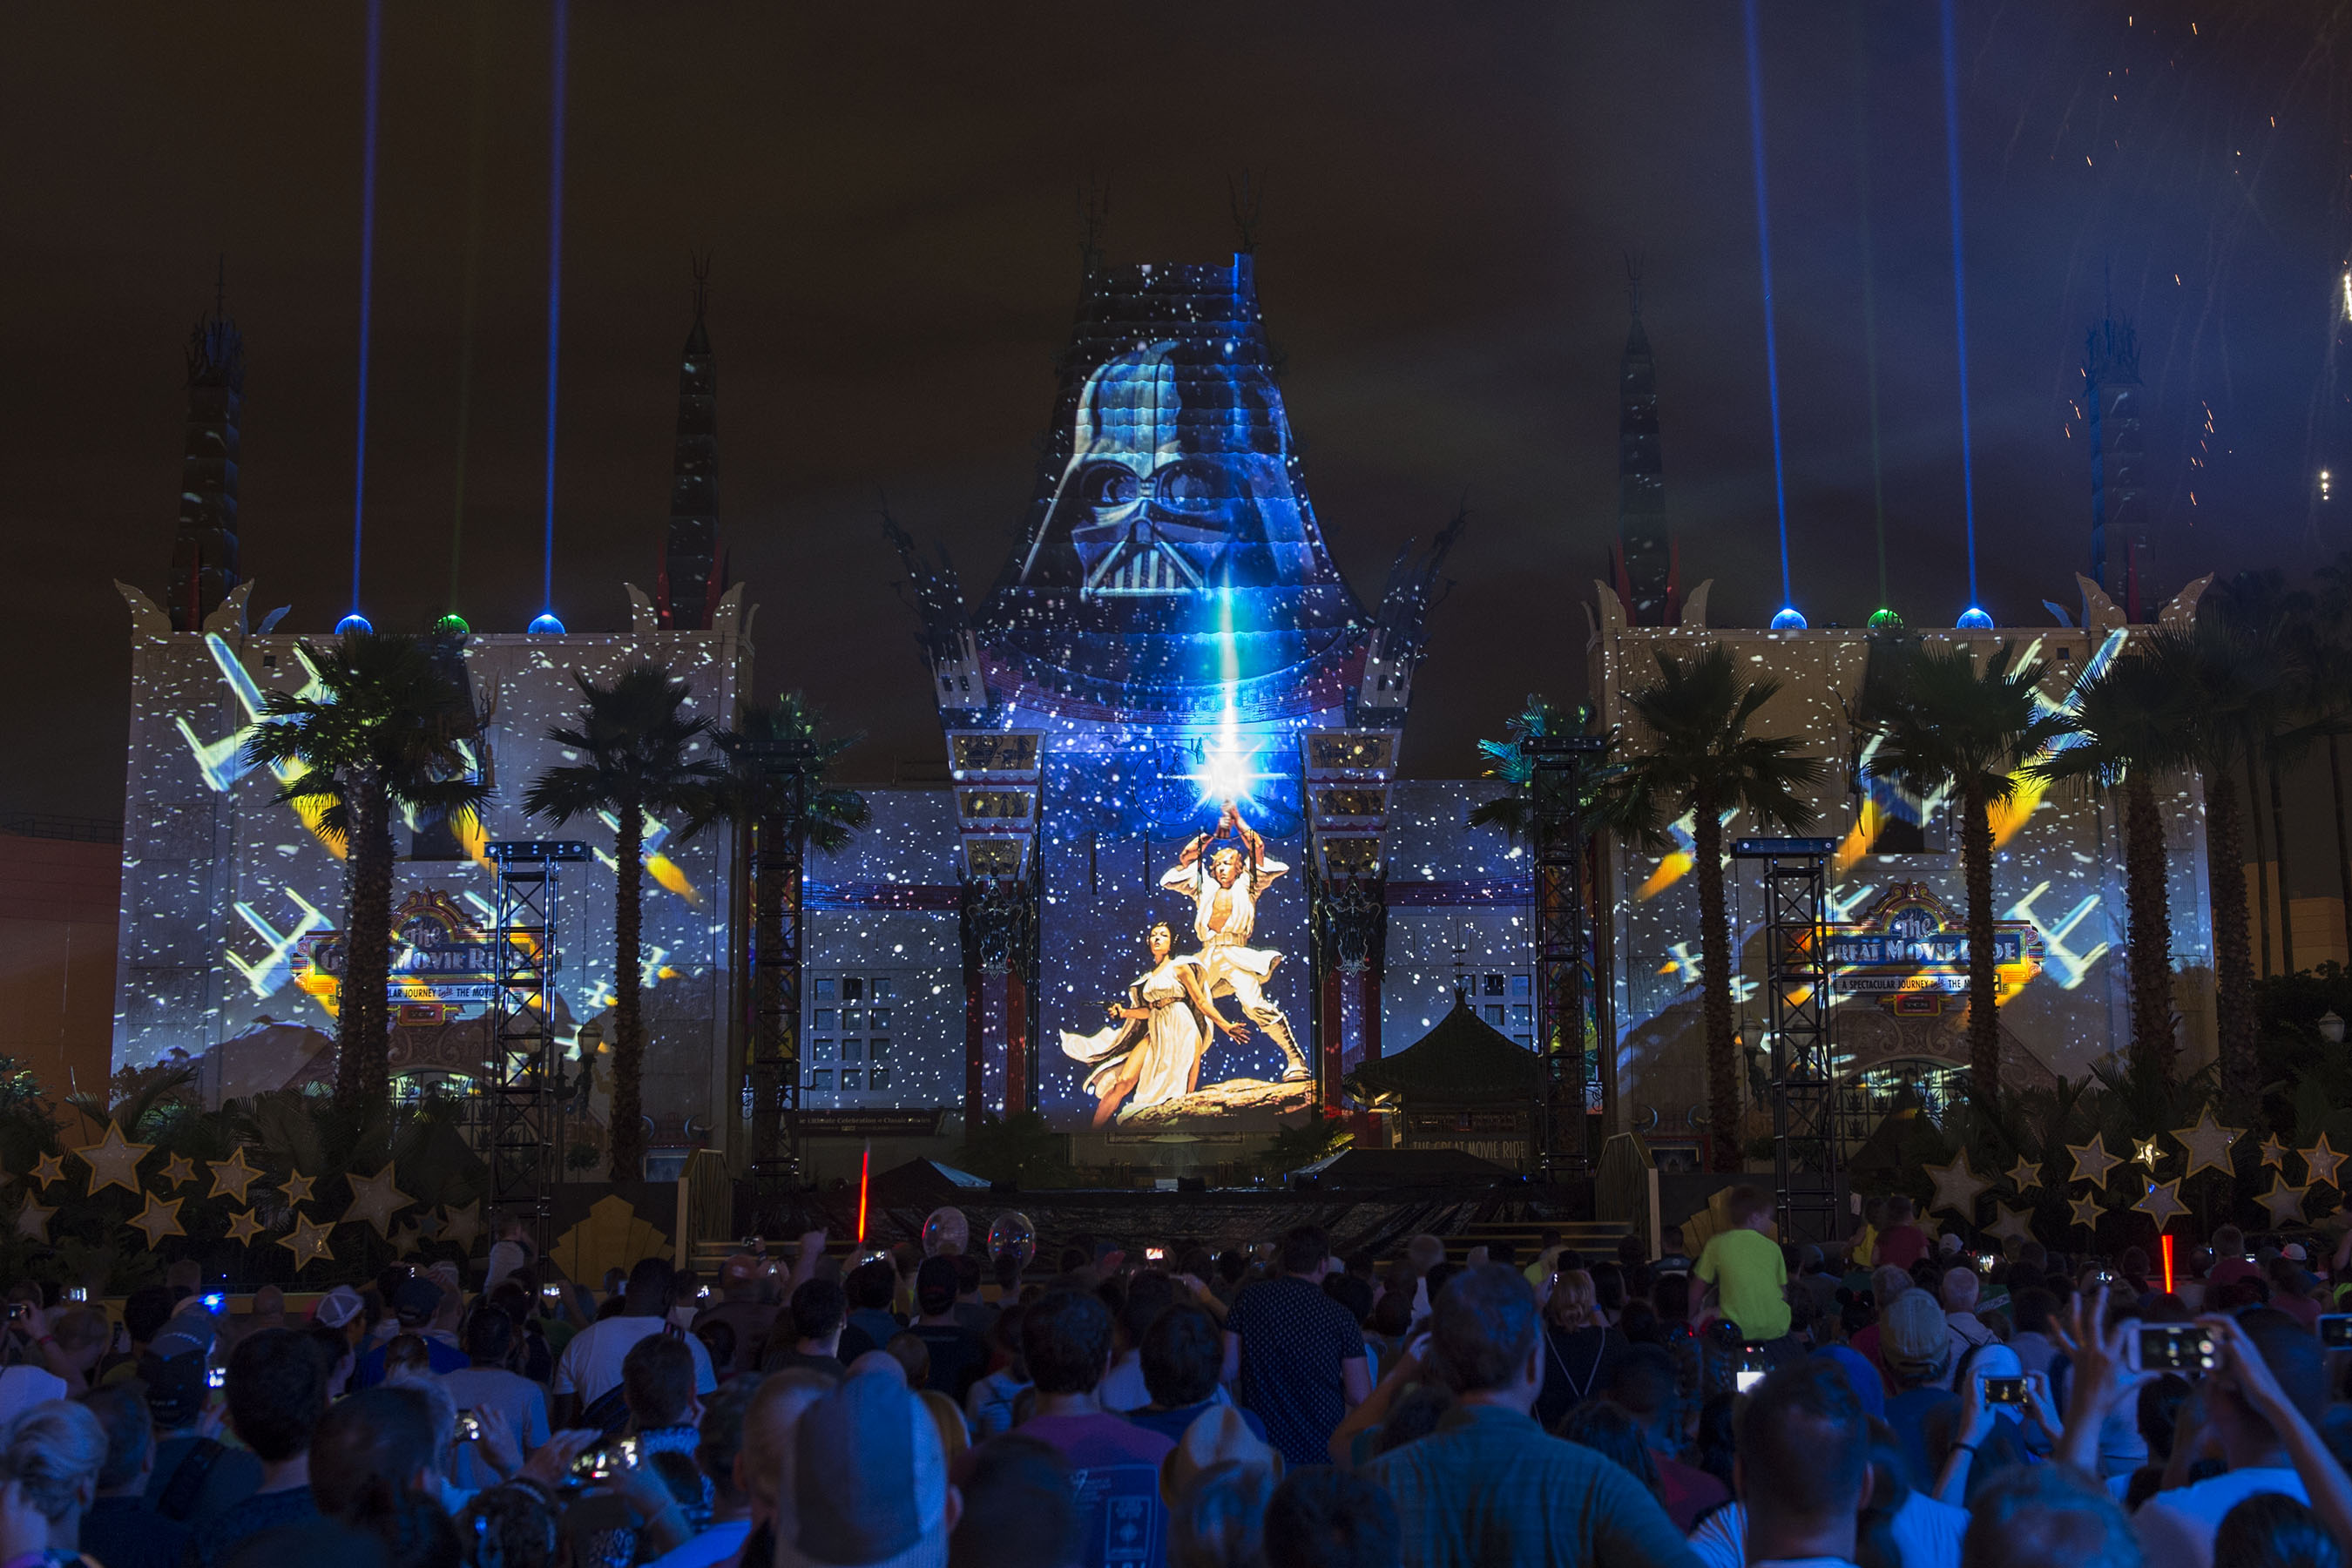 “Star Wars: A Galactic Spectacular” Fireworks and Projection Show Immerses Disney’s Hollywood Studios Guests in Galaxies Far, Far Away